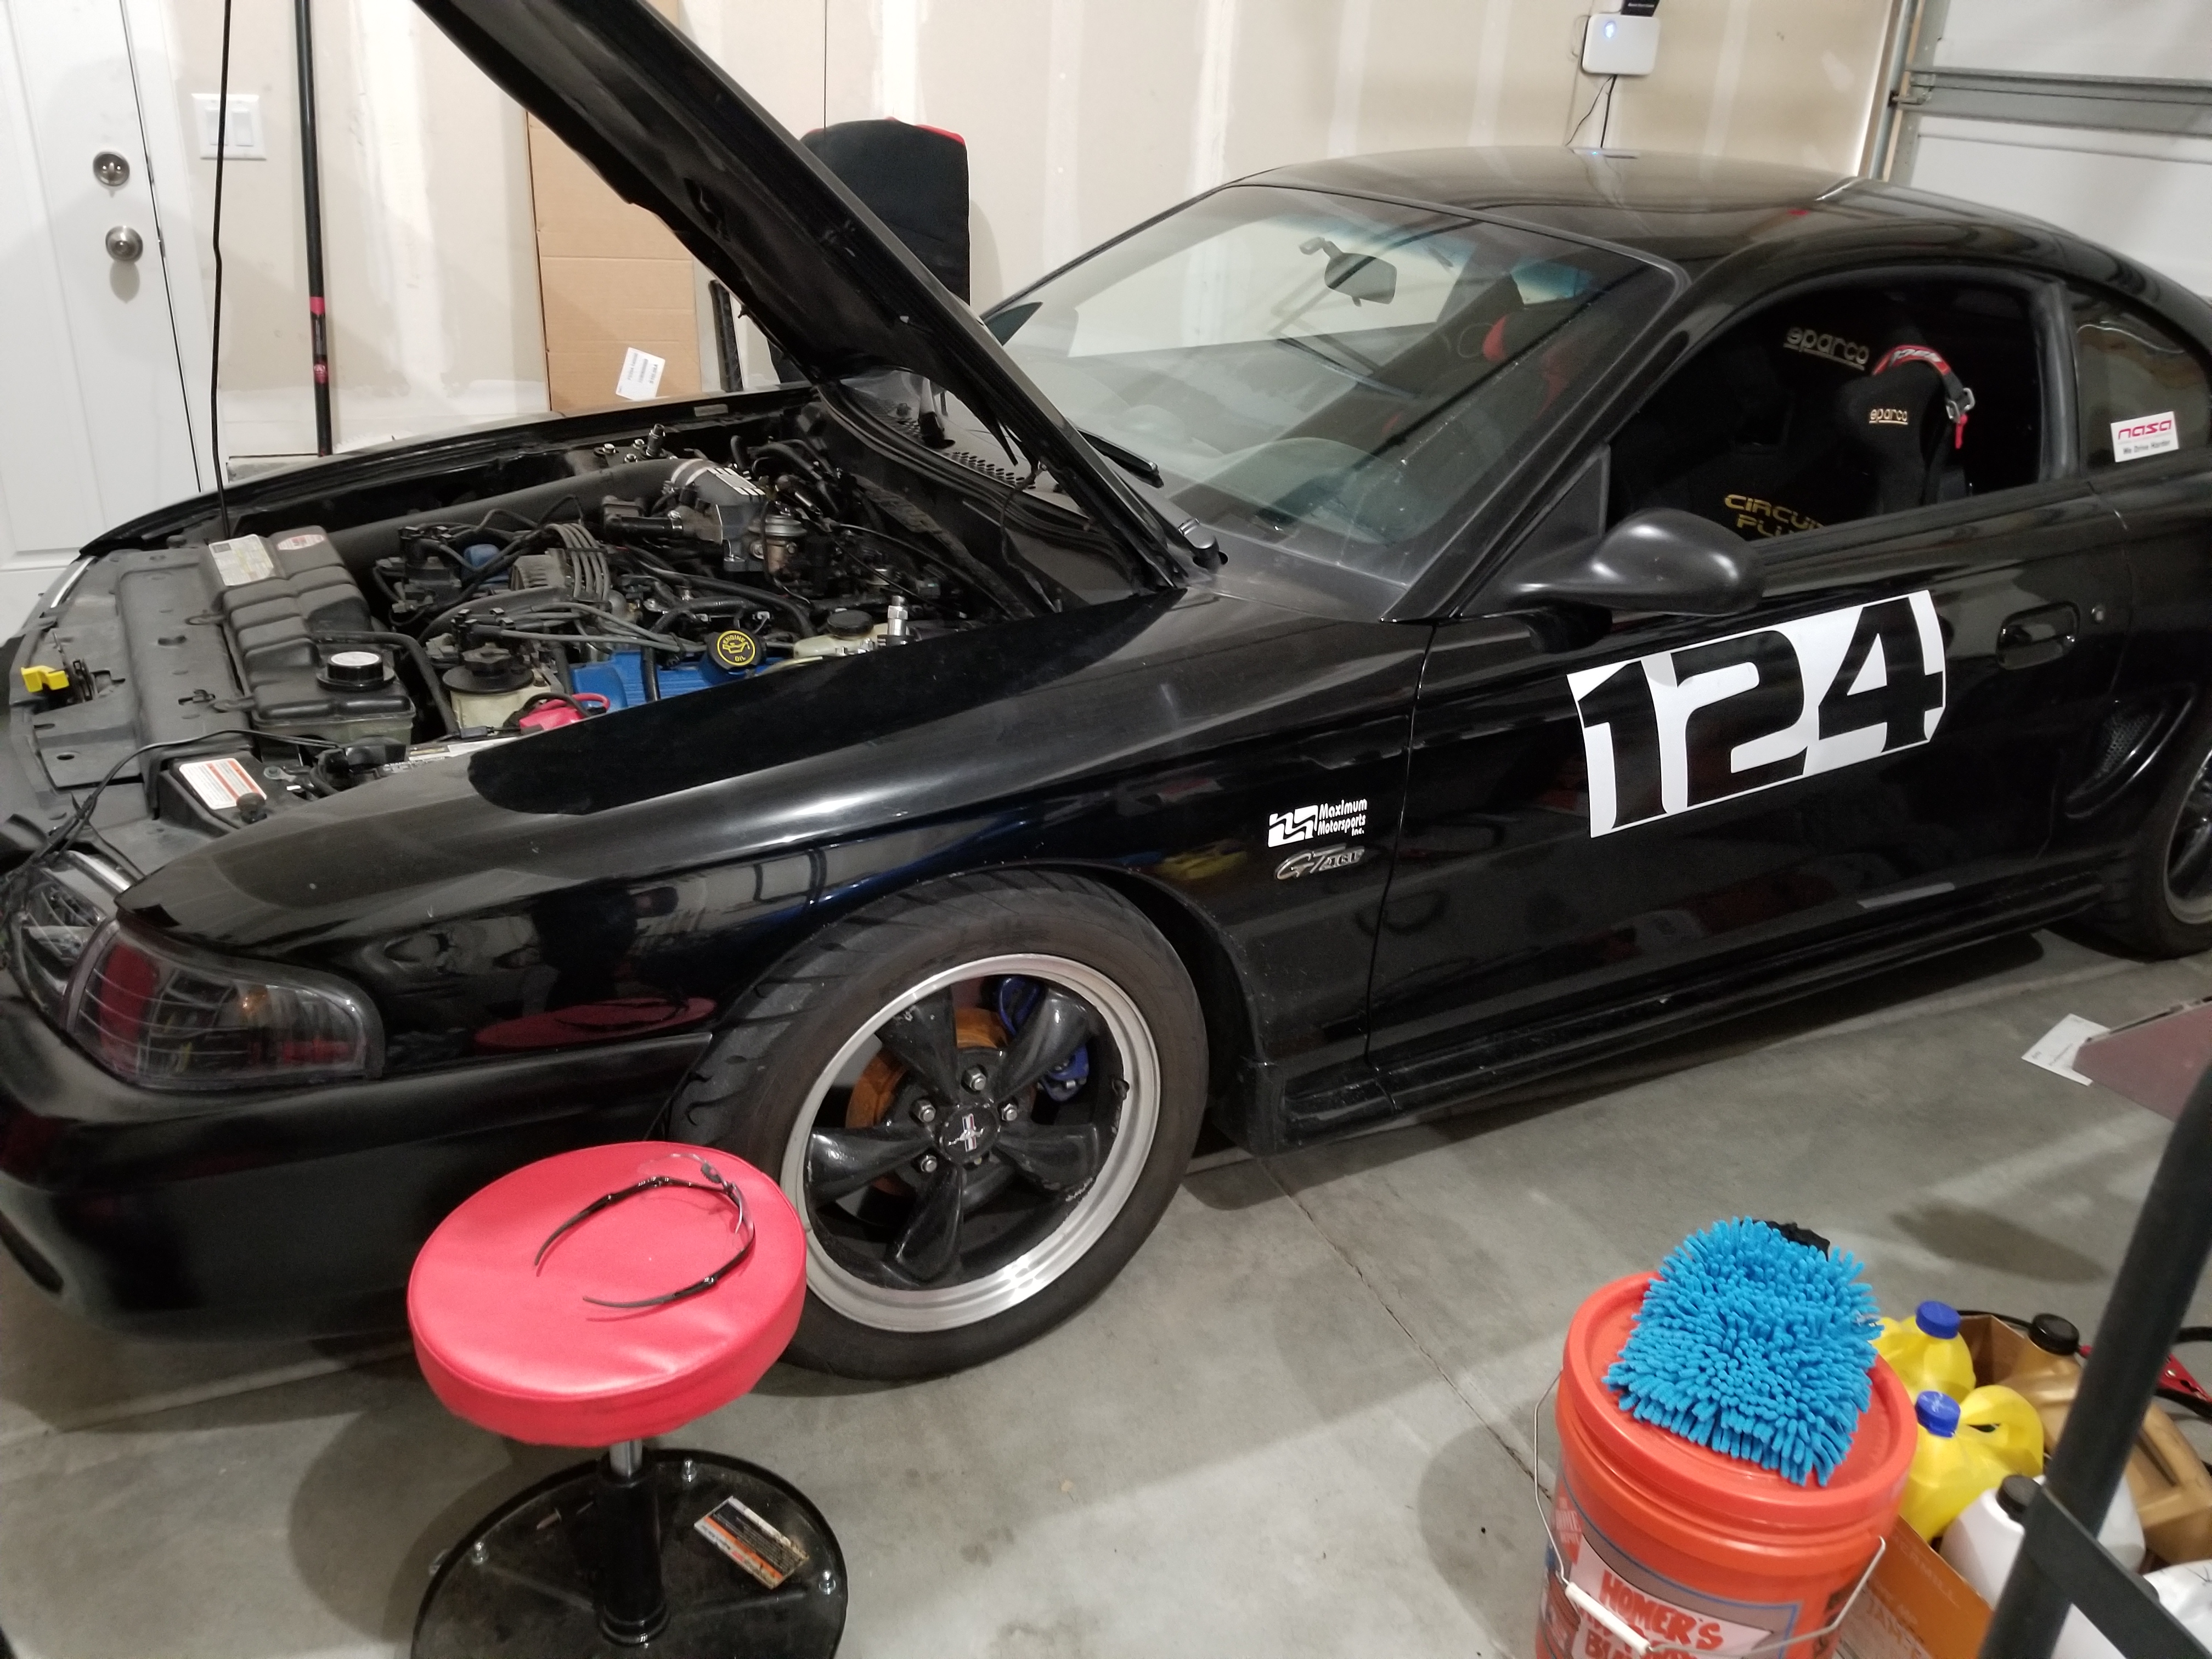 1996 Mustang
(1996 GT Track Toy)